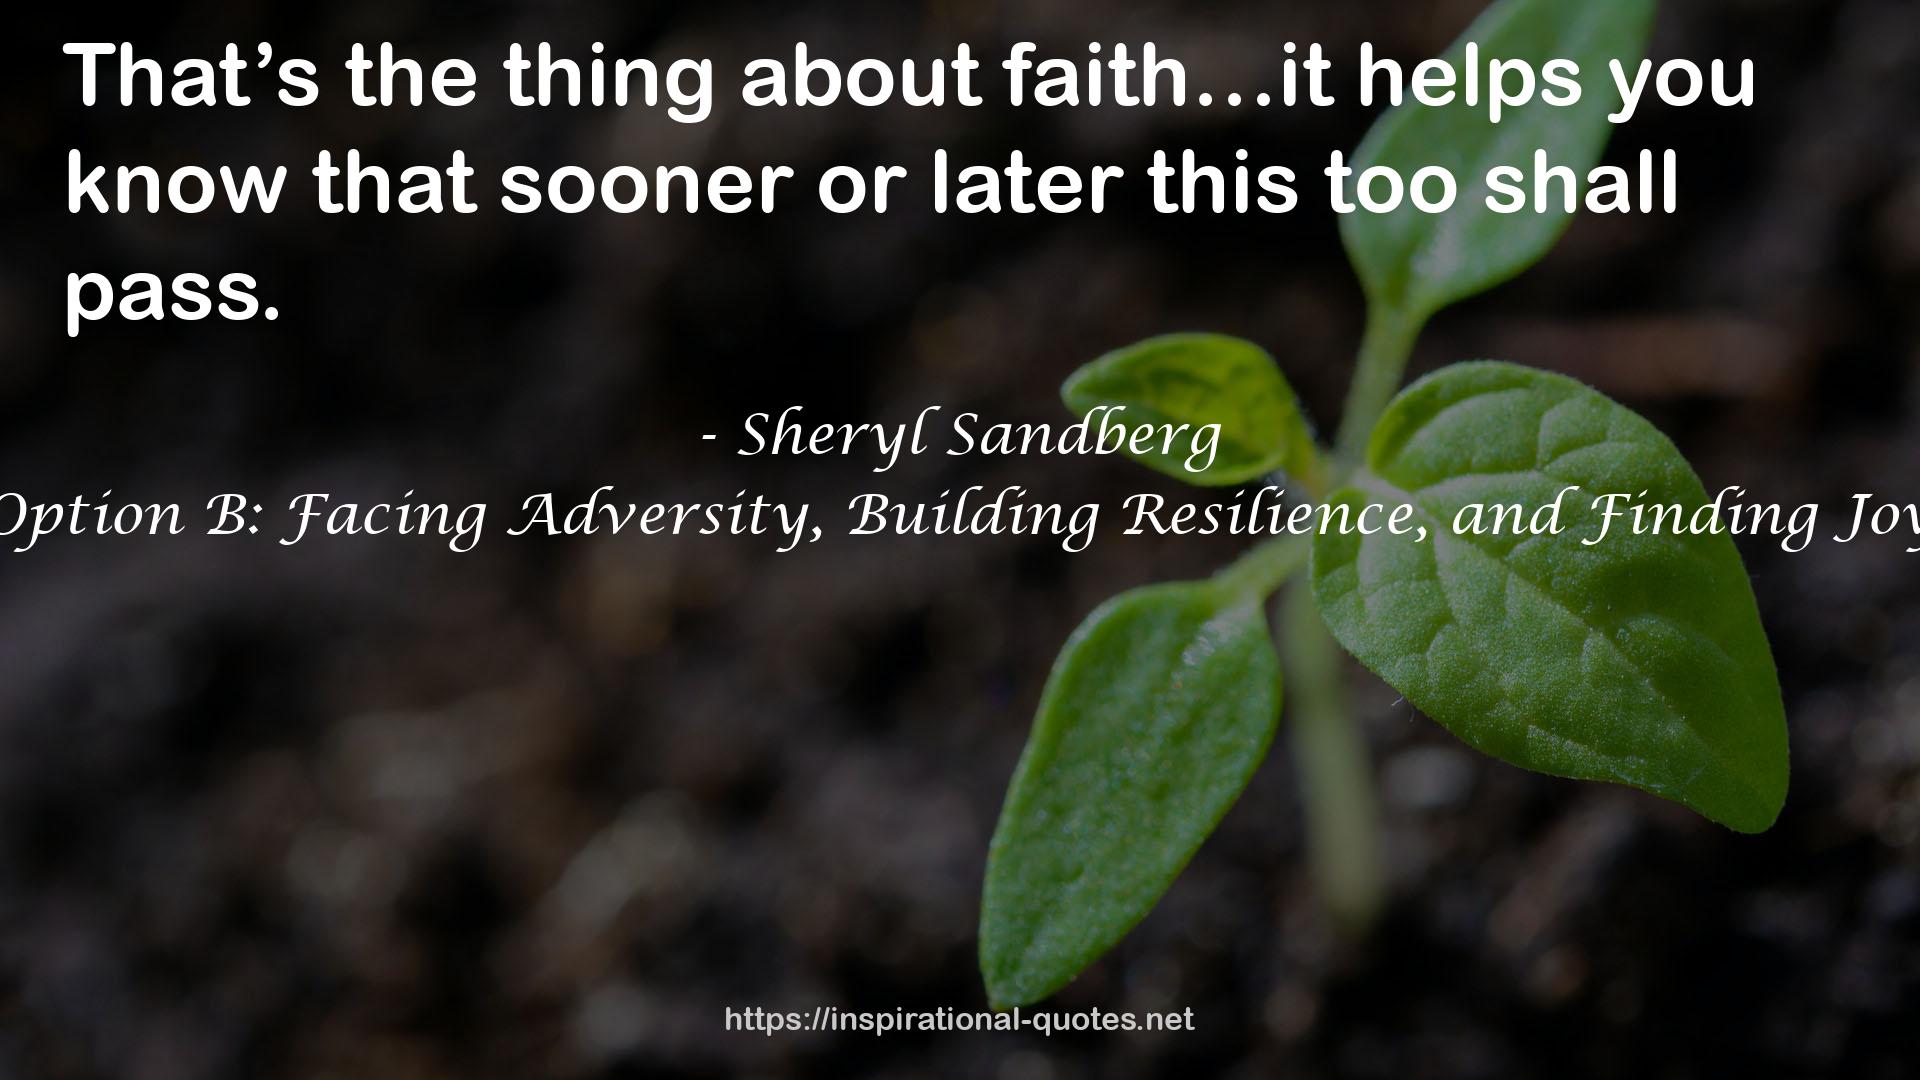 Option B: Facing Adversity, Building Resilience, and Finding Joy QUOTES